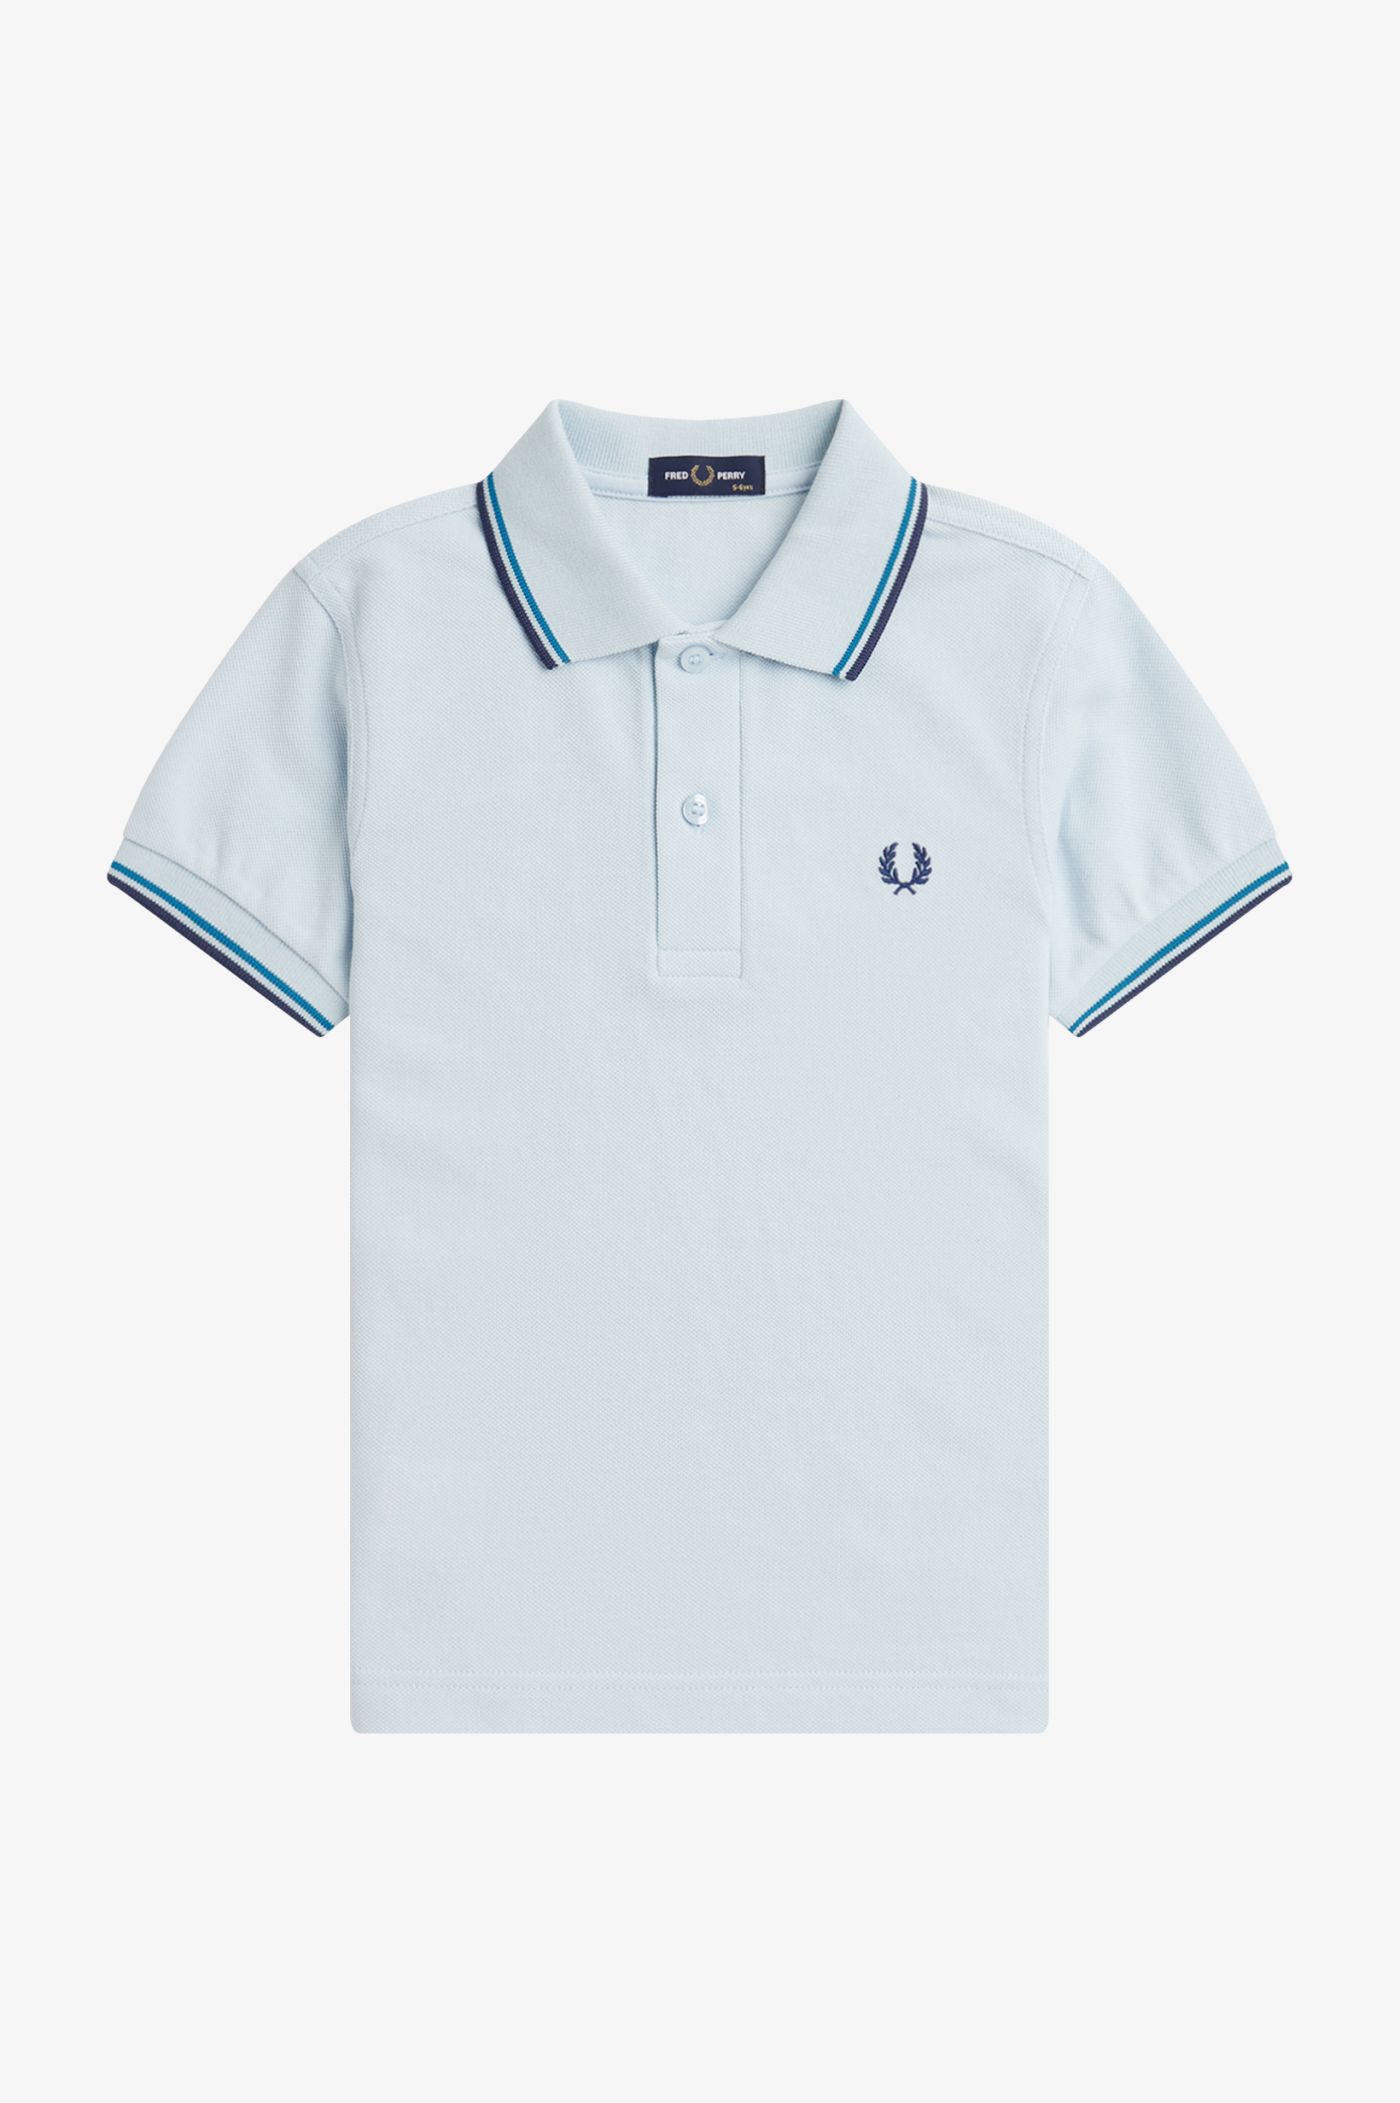 Kids Twin Tipped Fred Perry Shirt - Light Ice / Cyber Blue / Midnight Blue  | Kids | Children's Polo Shirts & Kids Designer Clothes | Fred Perry US